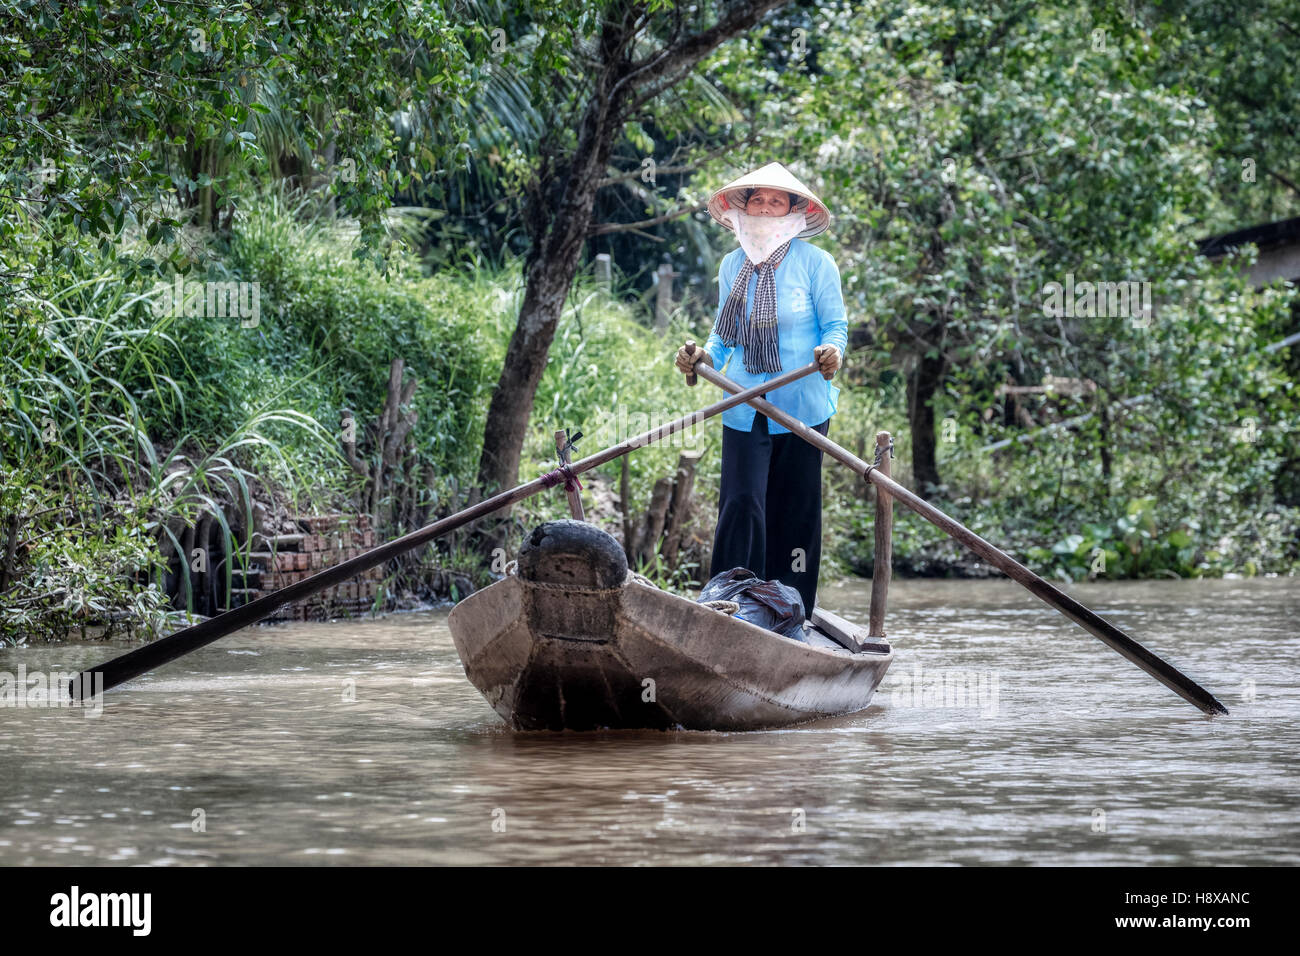 woman rowing a sampan boat on the Mekong River in Cai Be, Mekong Delta, Vietnam, Asia Stock Photo